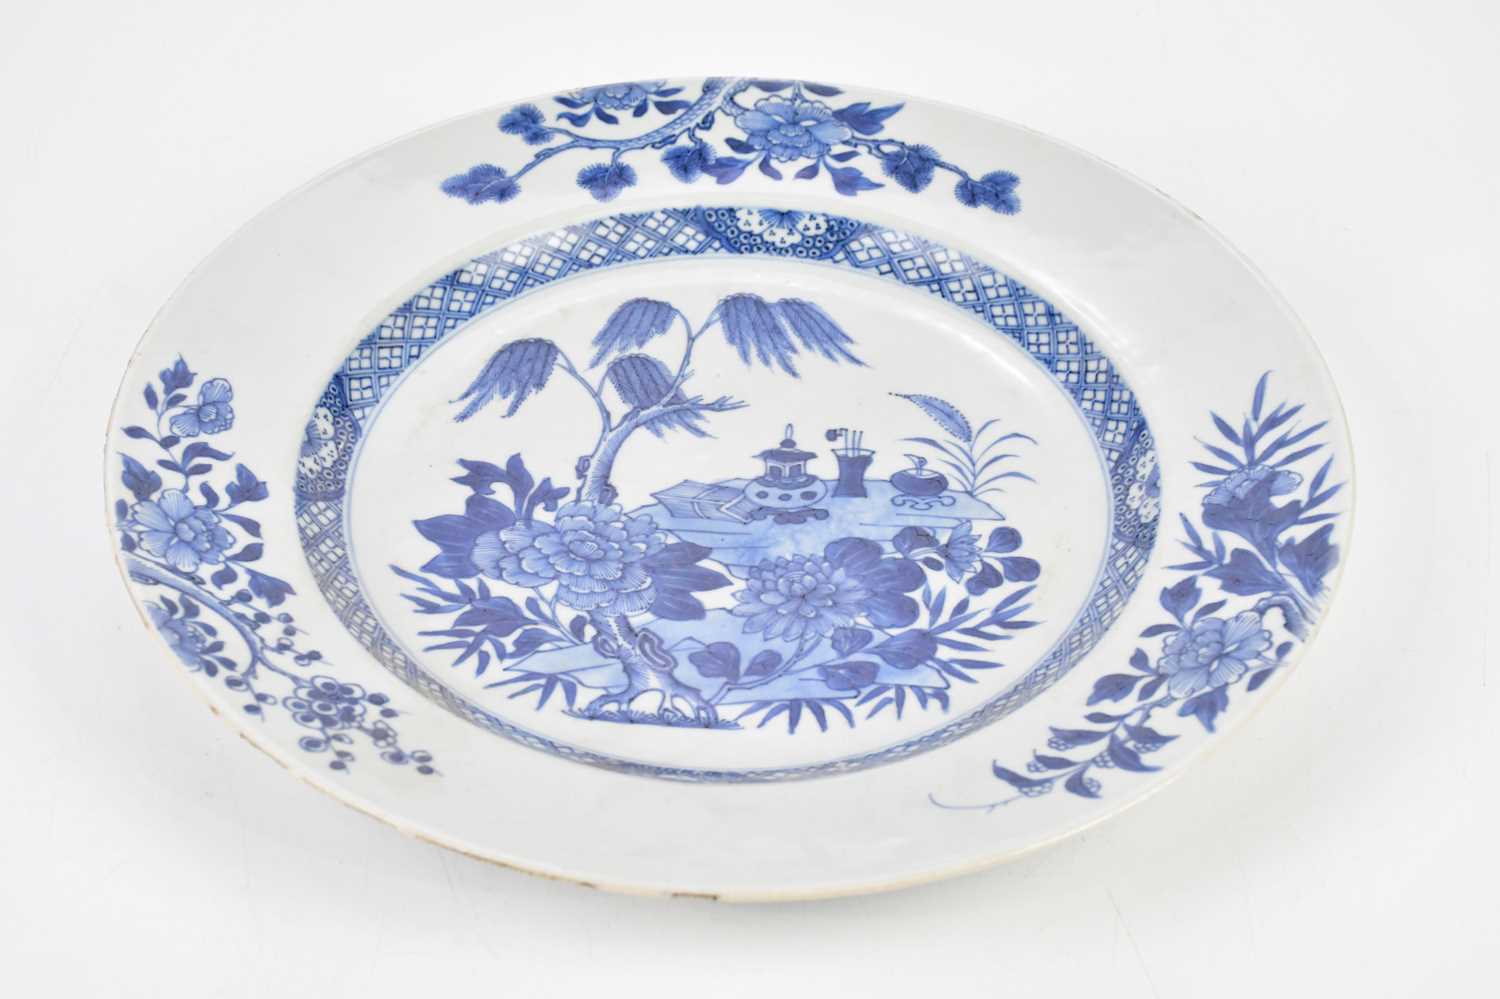 An 18th century Chinese Export blue and white plate, decorated with central scene of objects on a